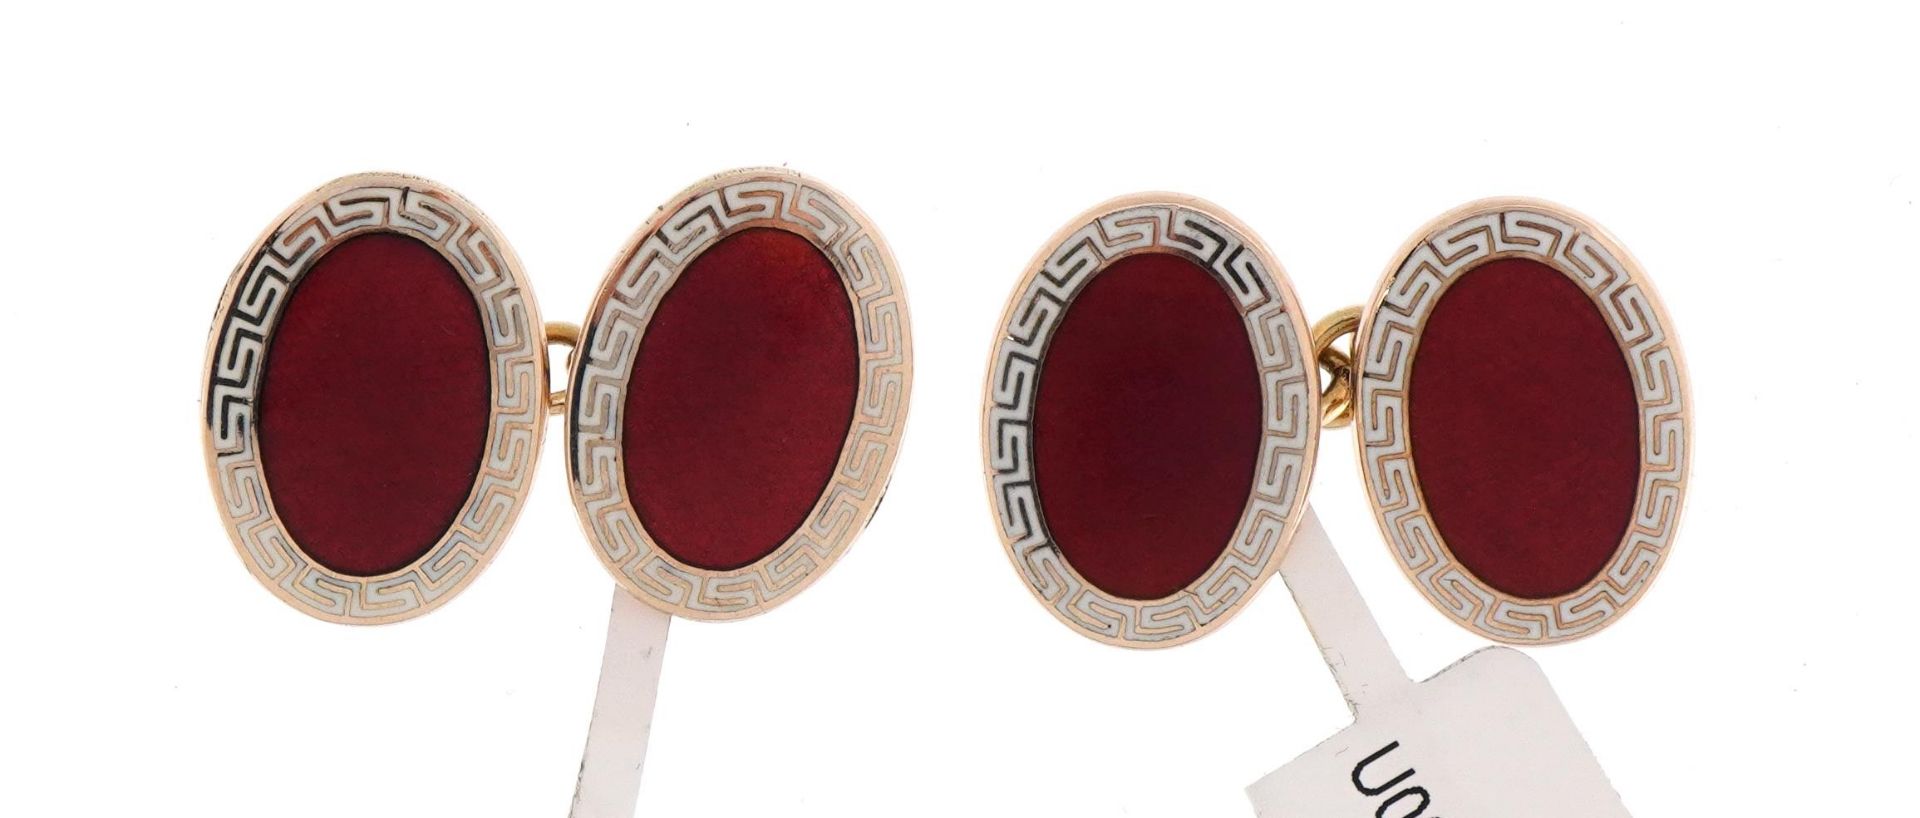 Pair of 9ct gold, red and white enamel cufflinks retailed by Asprey, housed in a Suttons & Robertson